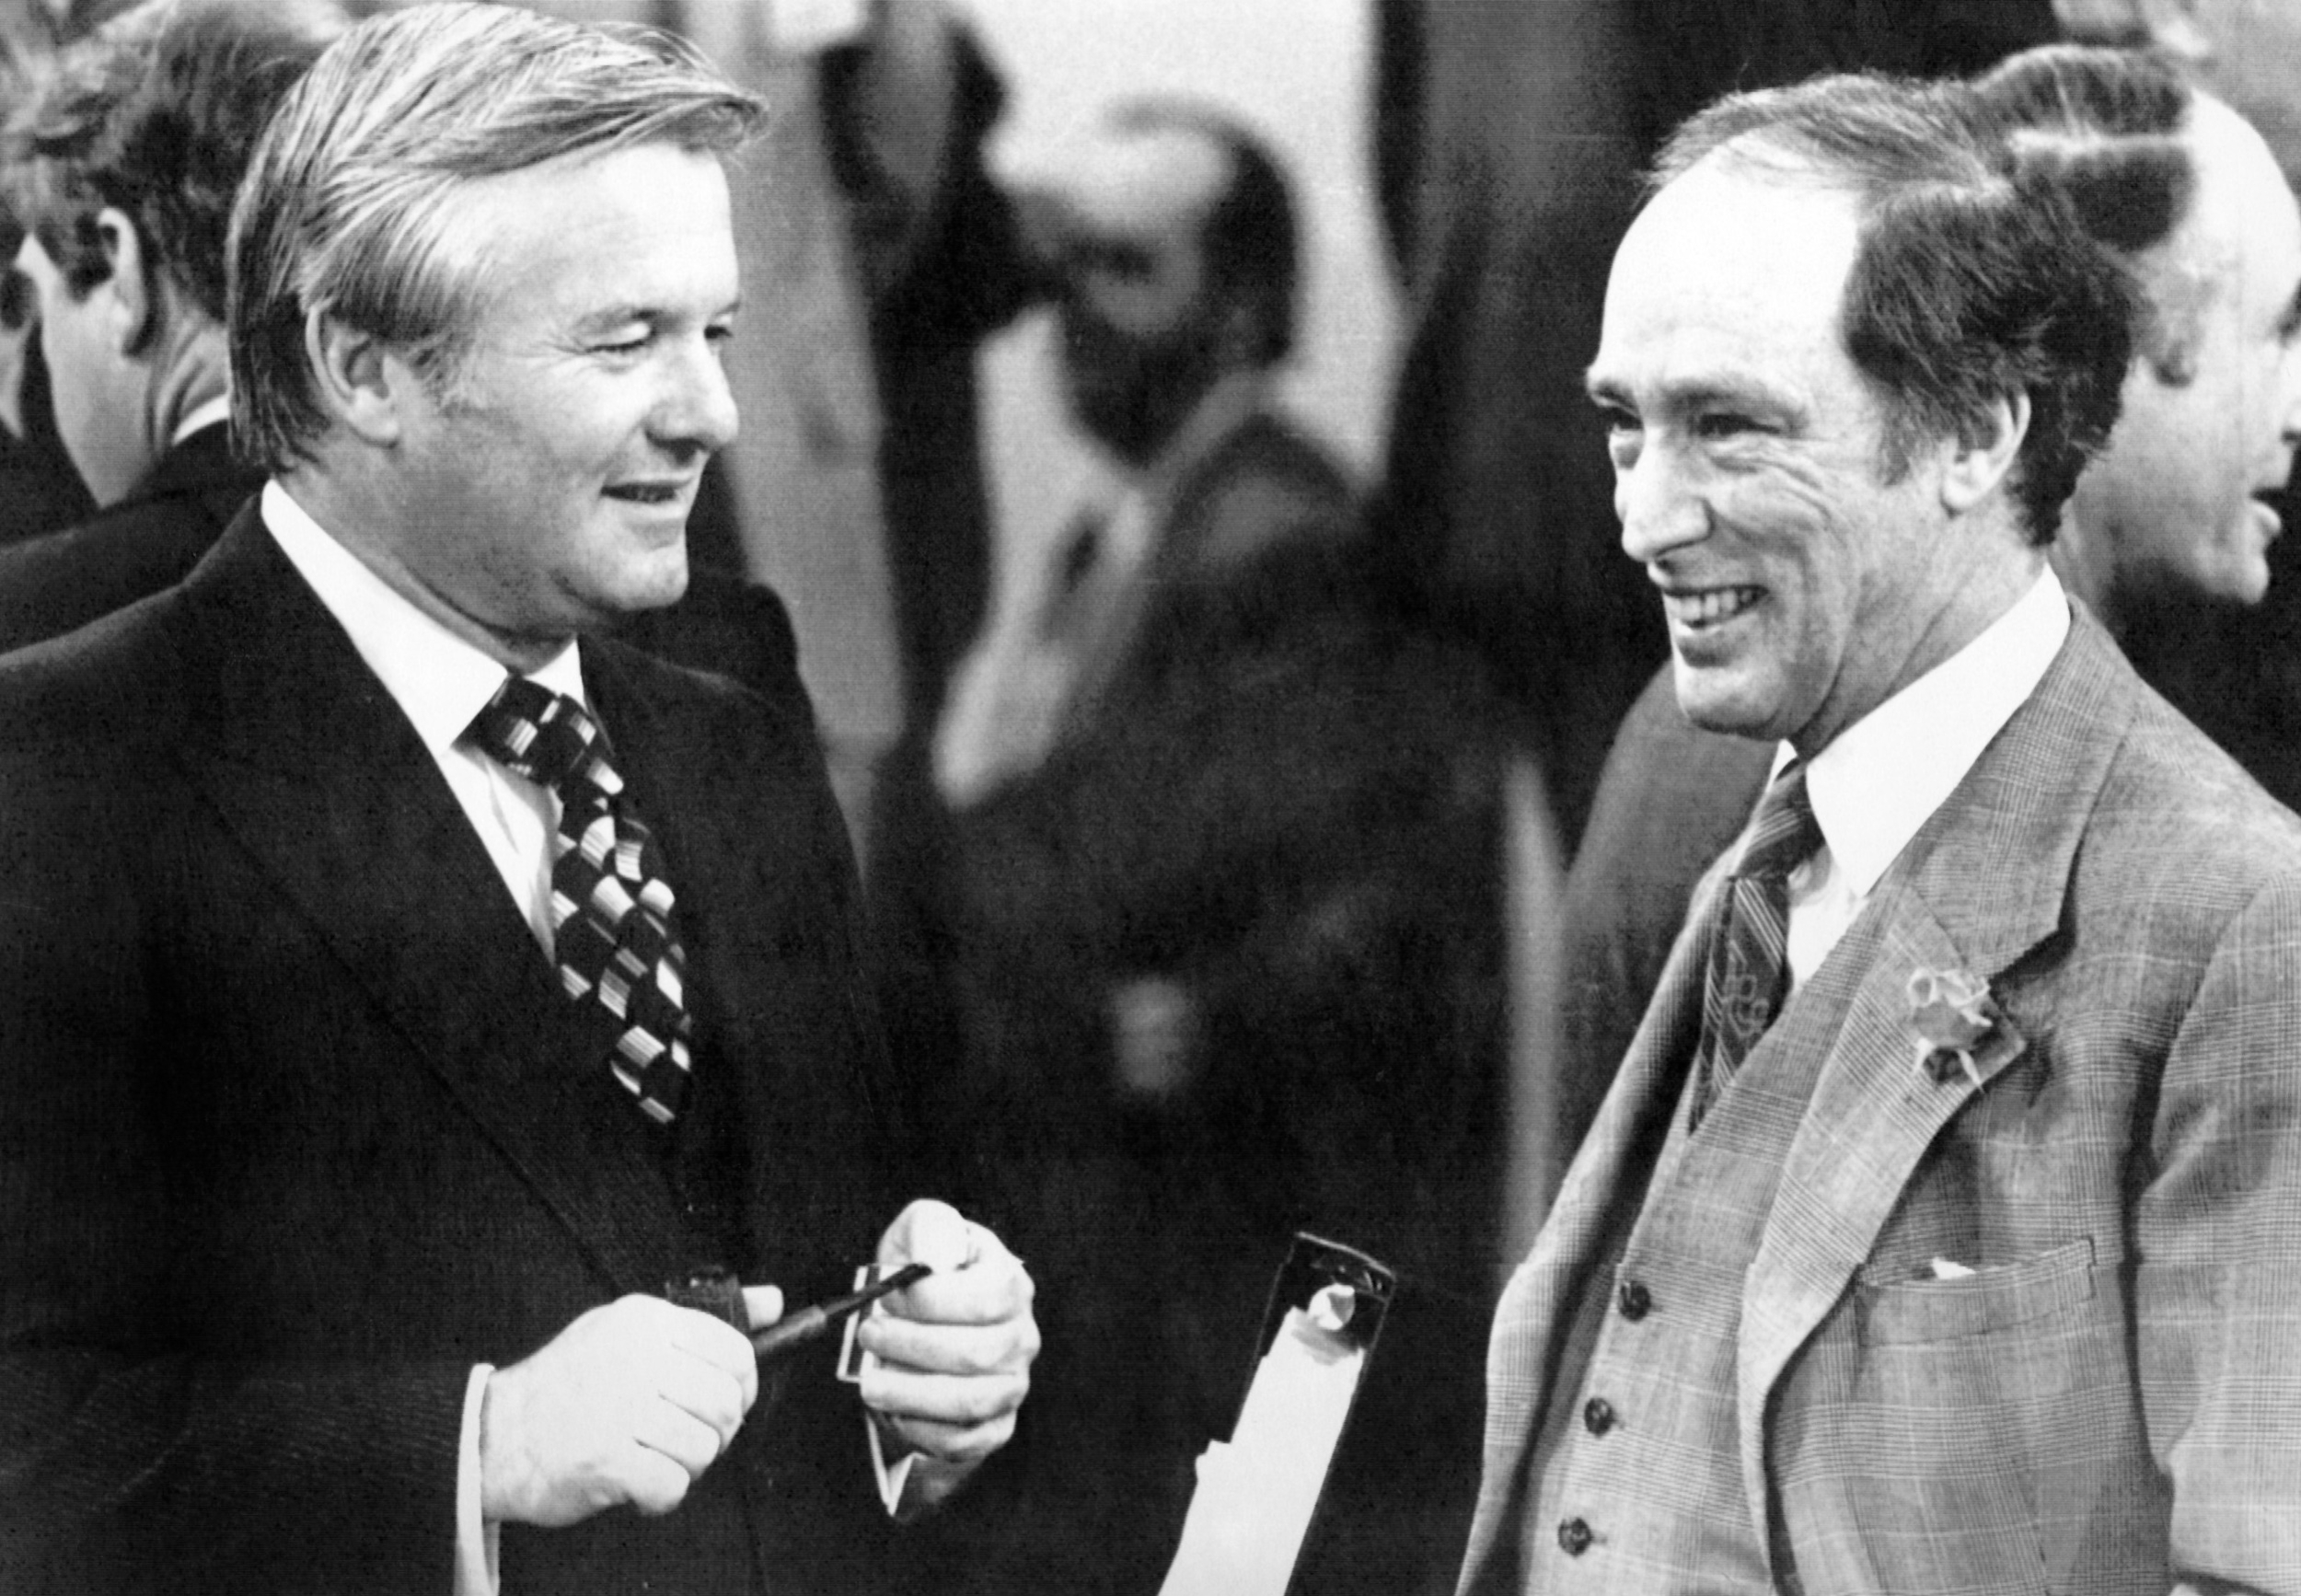 A black and white photo of Bill Davis and Pierre Trudeau in conversation